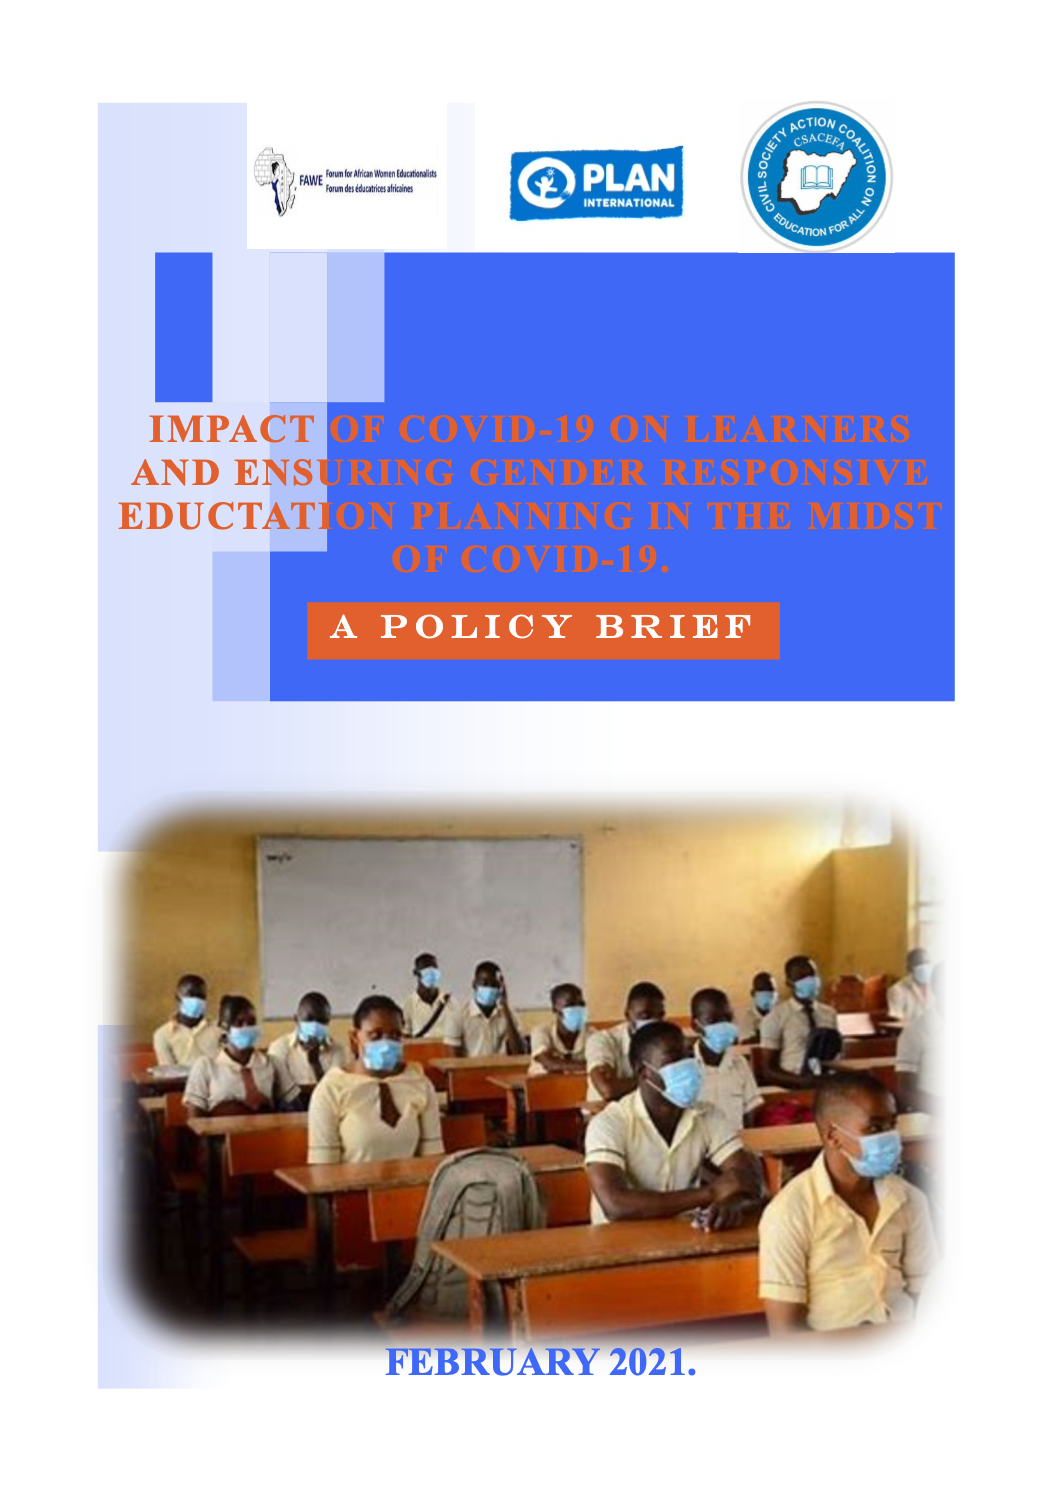 Impact of COVID-19 on learners and ensuring gender responsive education planning in the midst of COVID-19 in North East Nigeria